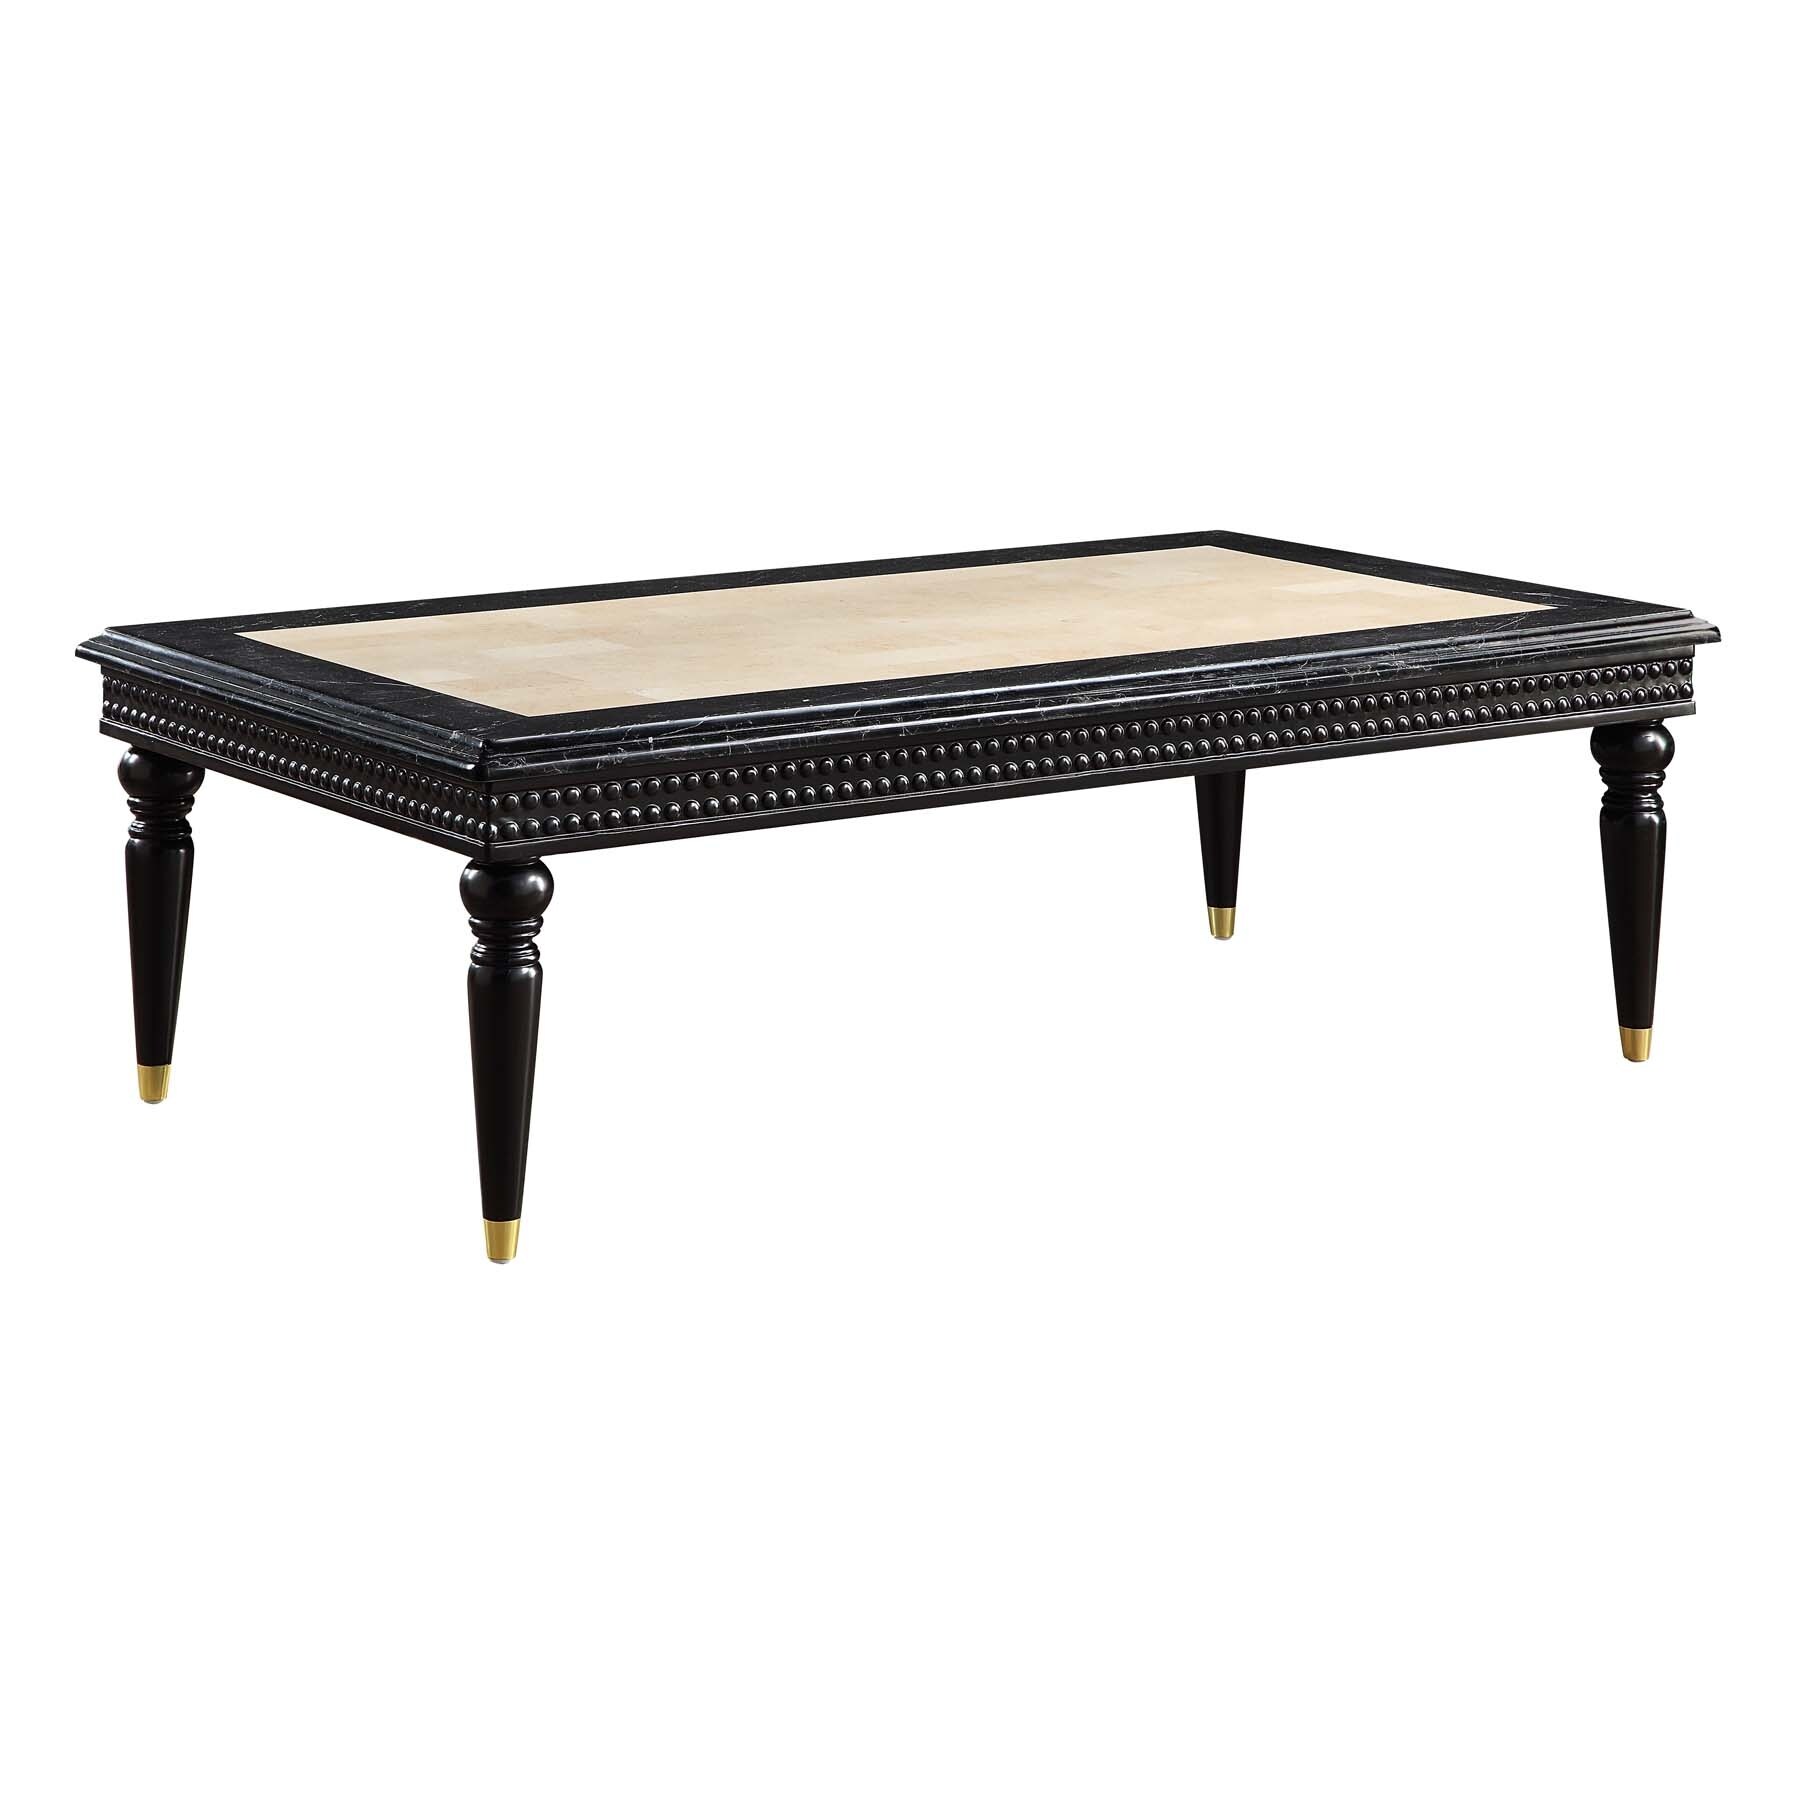 Simple Relax Rectangular Marble Top Coffee Table with Wooden Turn Legs in Black